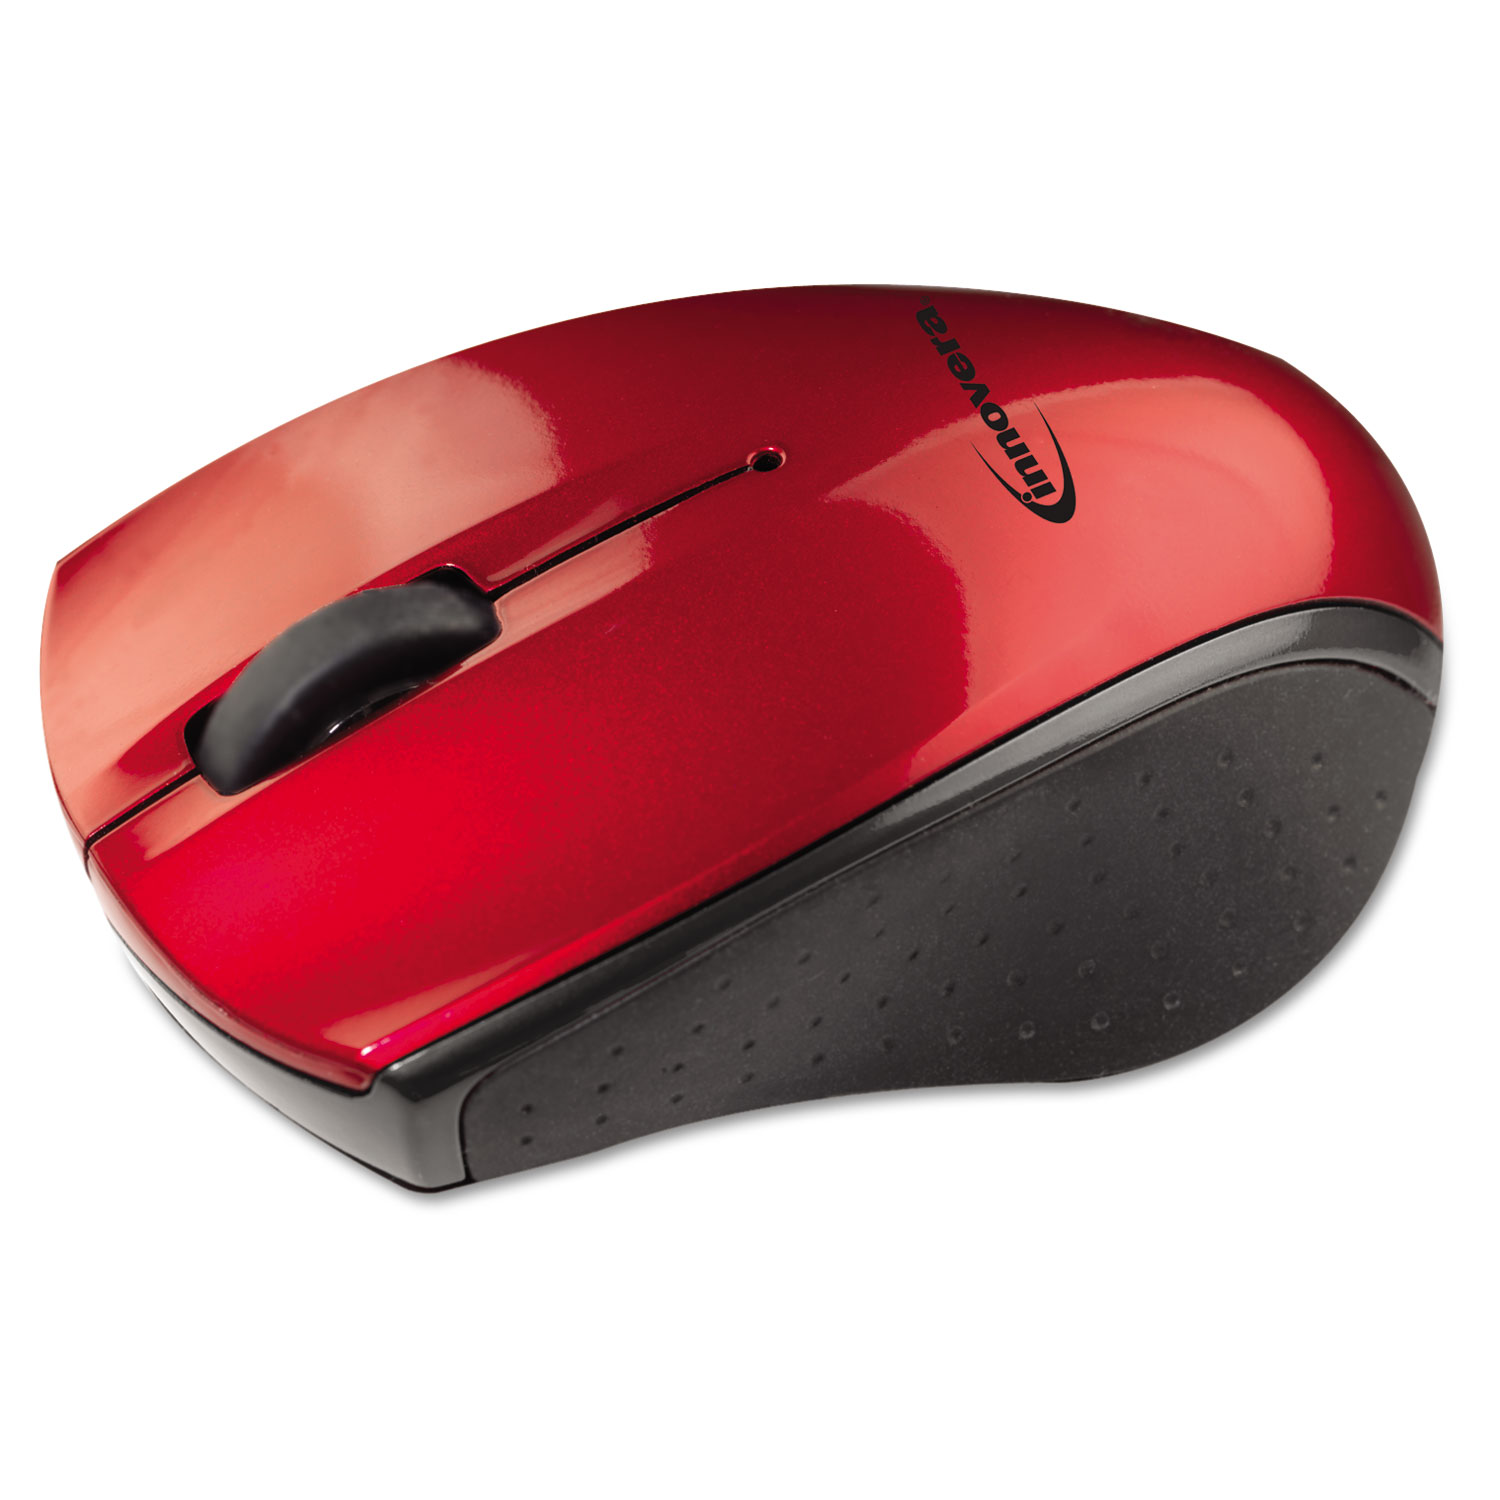 Mini Wireless Optical Mouse, Three Buttons, Red/Black